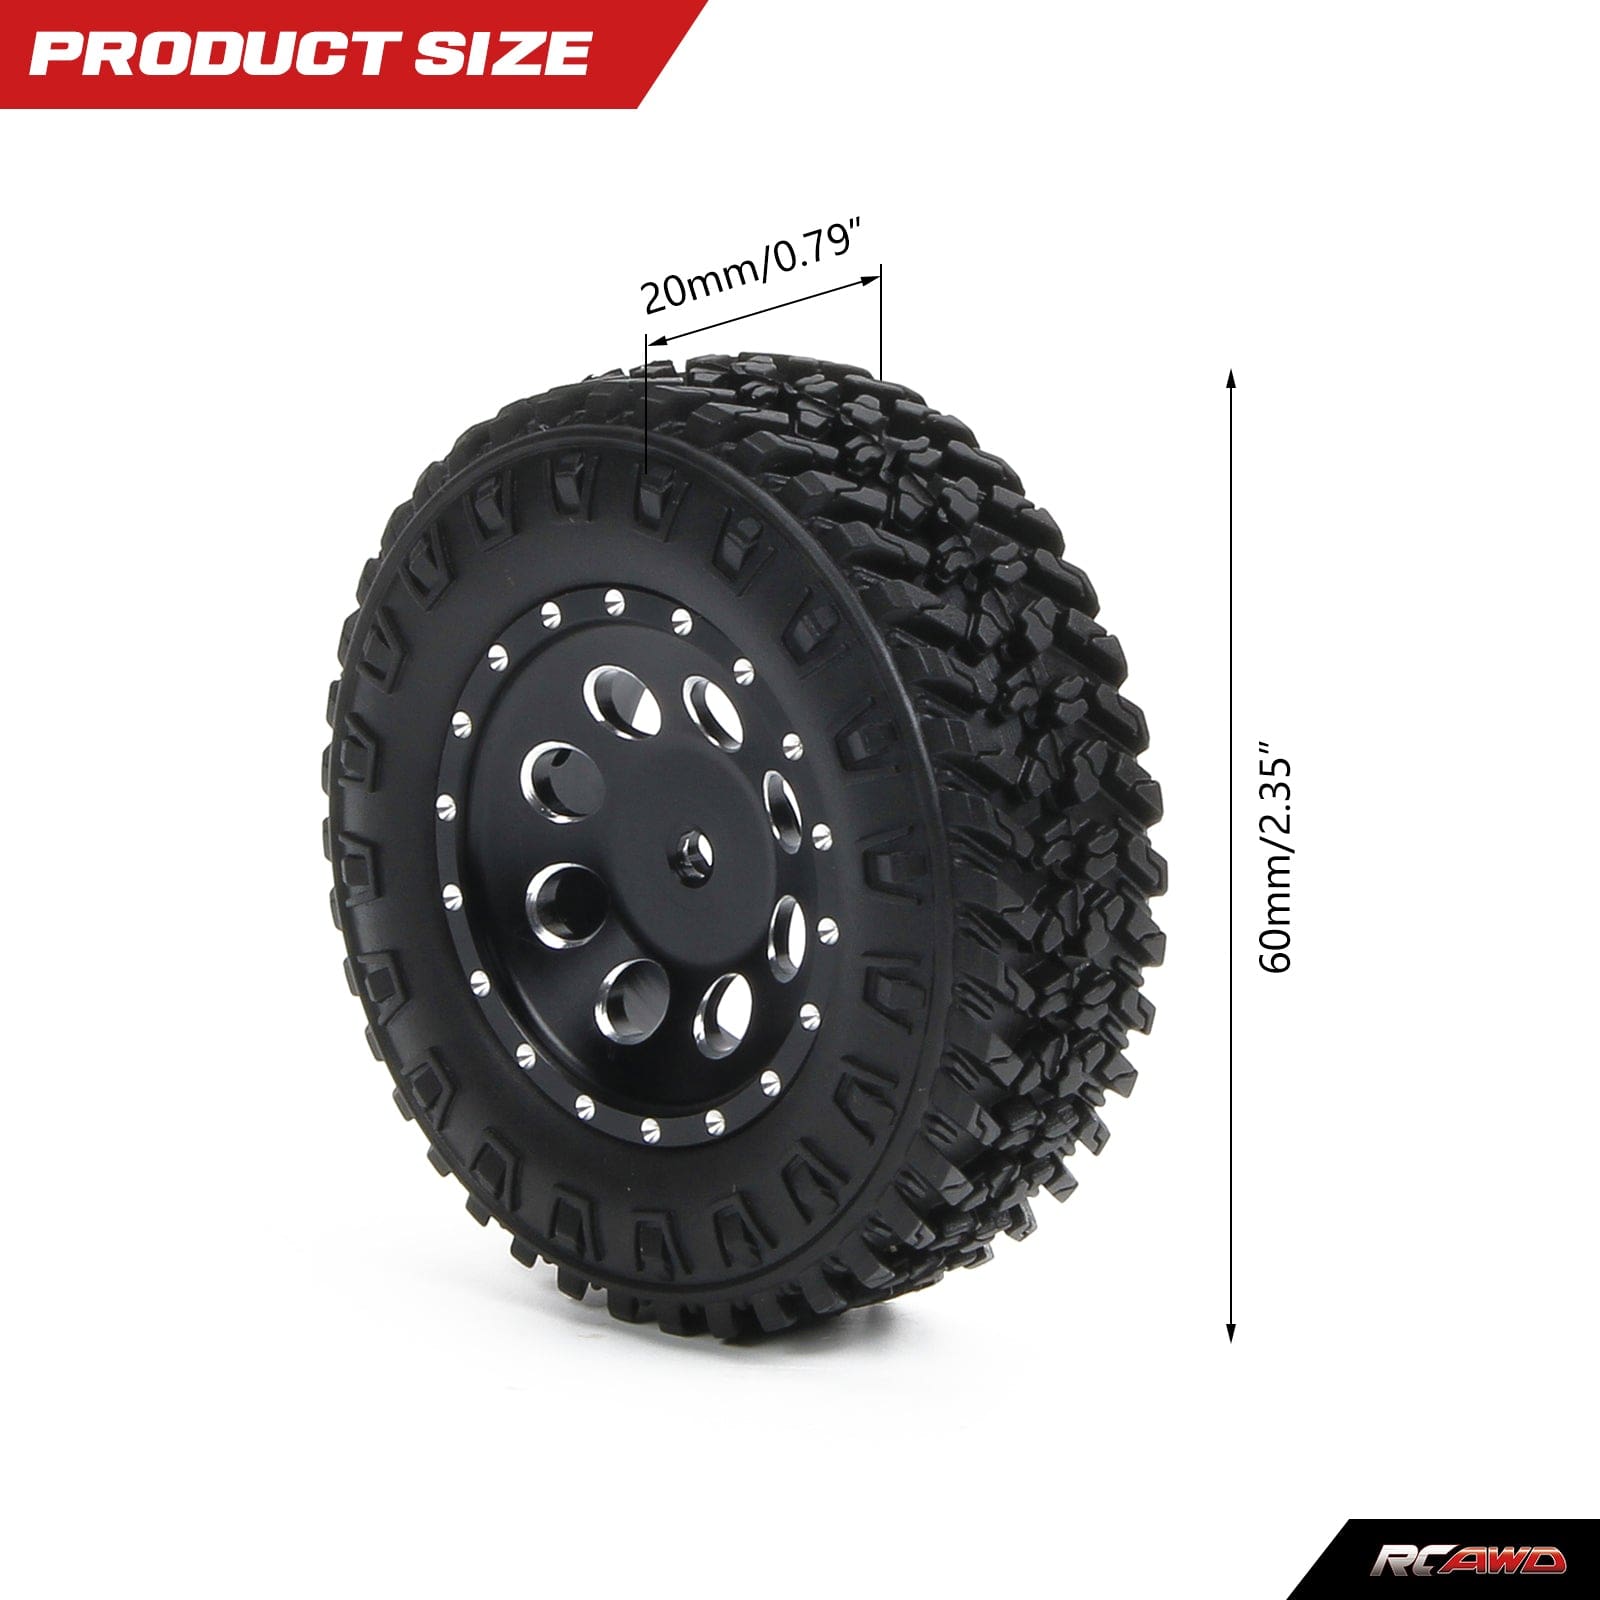 RCAWD RCAWD C3062 FMS FCX24 Upgrades Full alloy 1.25”wheel tire(OD: 60mmWidth: 20mm)